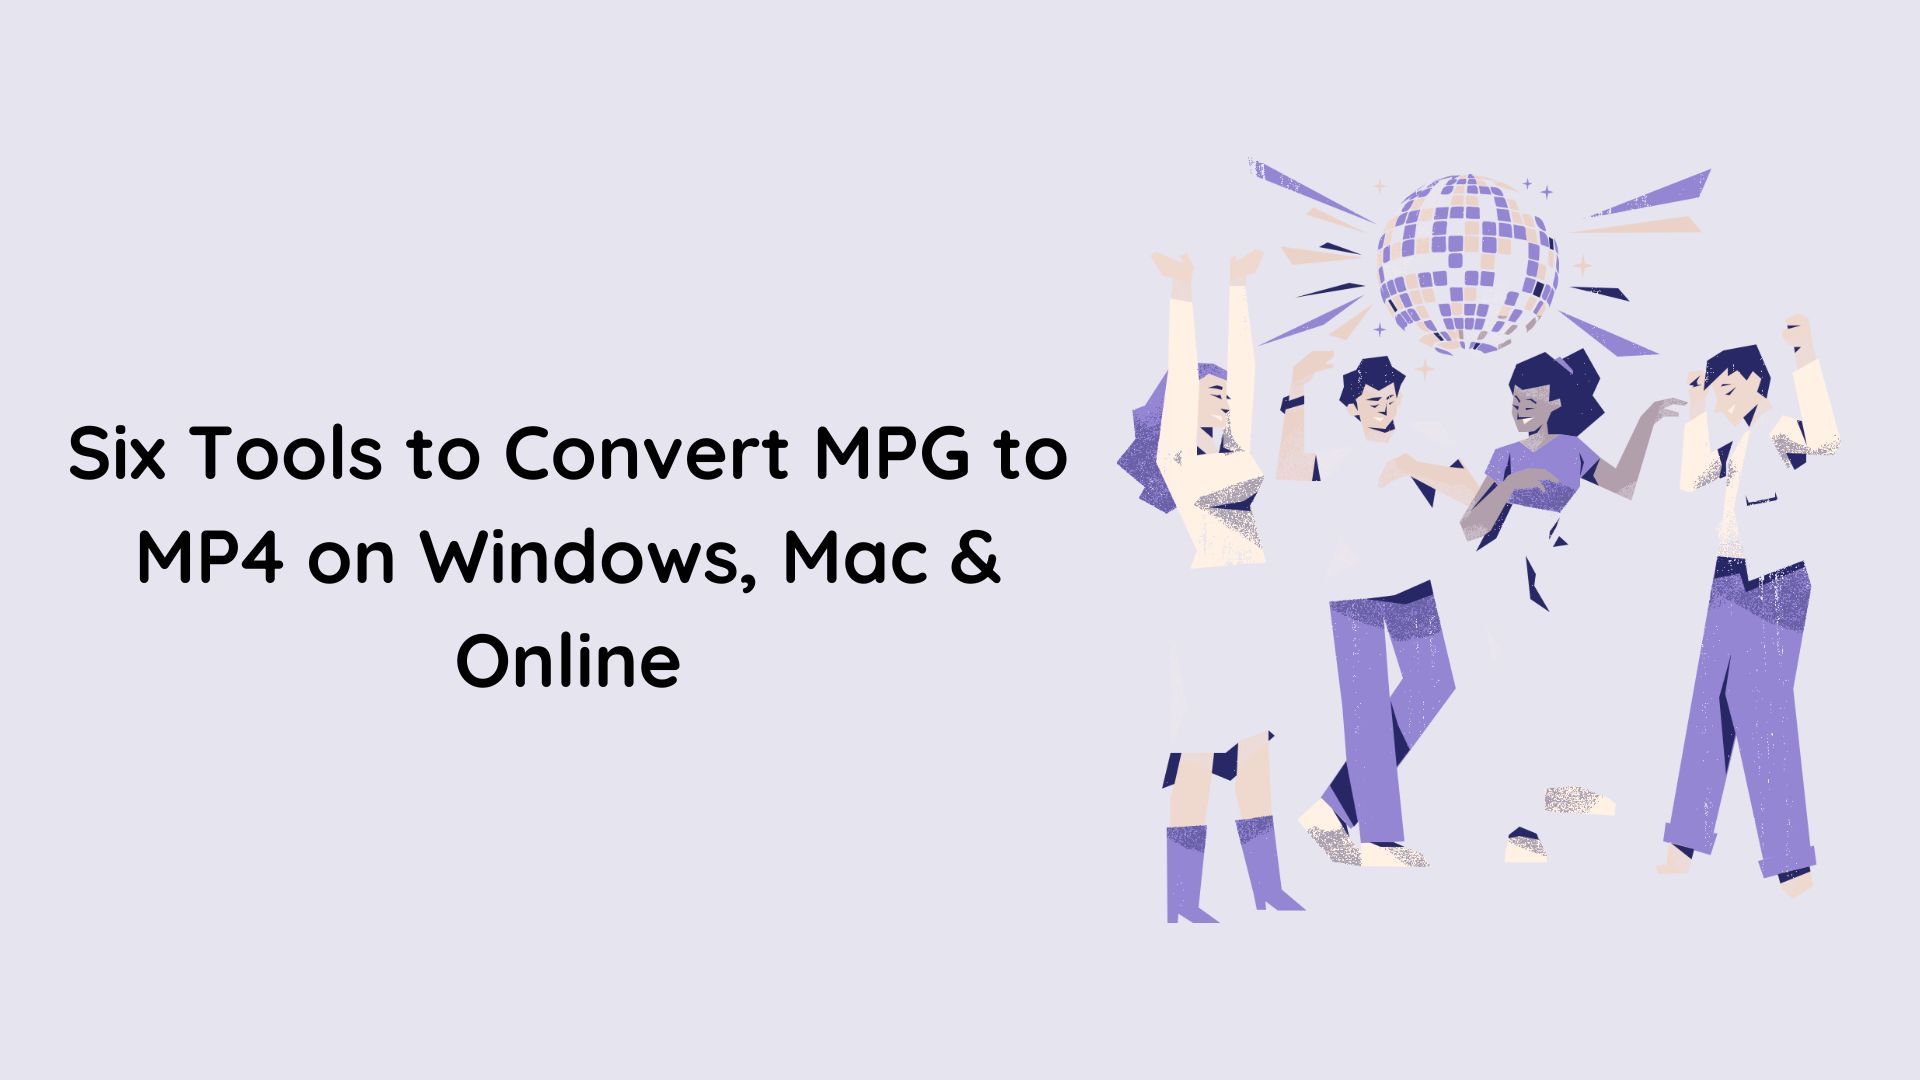 Six Tools to Convert MPG to MP4 on Windows, Mac & Online